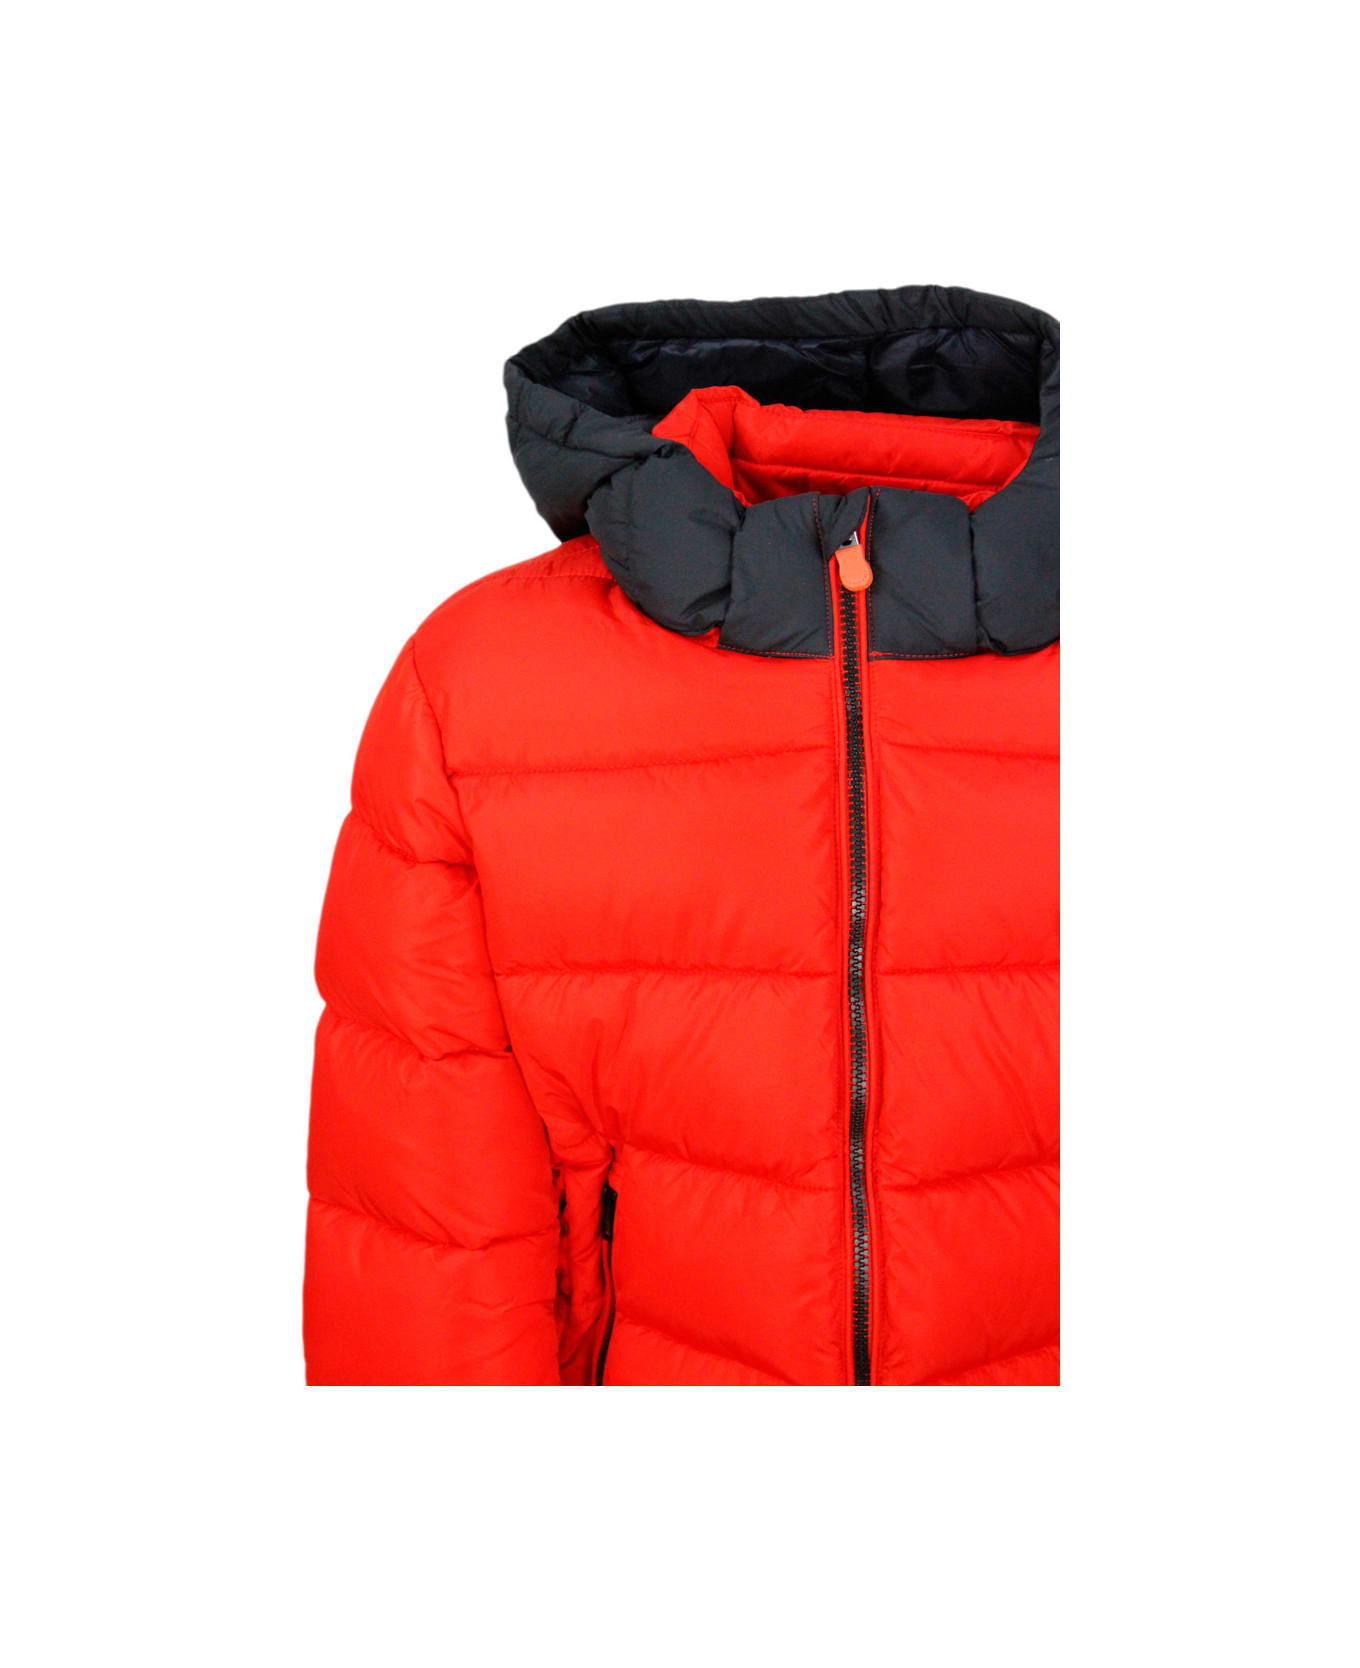 Save the Duck Rumex Down Jacket With Detachable Hood With Animal Free Padding And No Animal Derivatives With Zip Closure And Logo On The Sleeve. Elasticated Edges. - Red